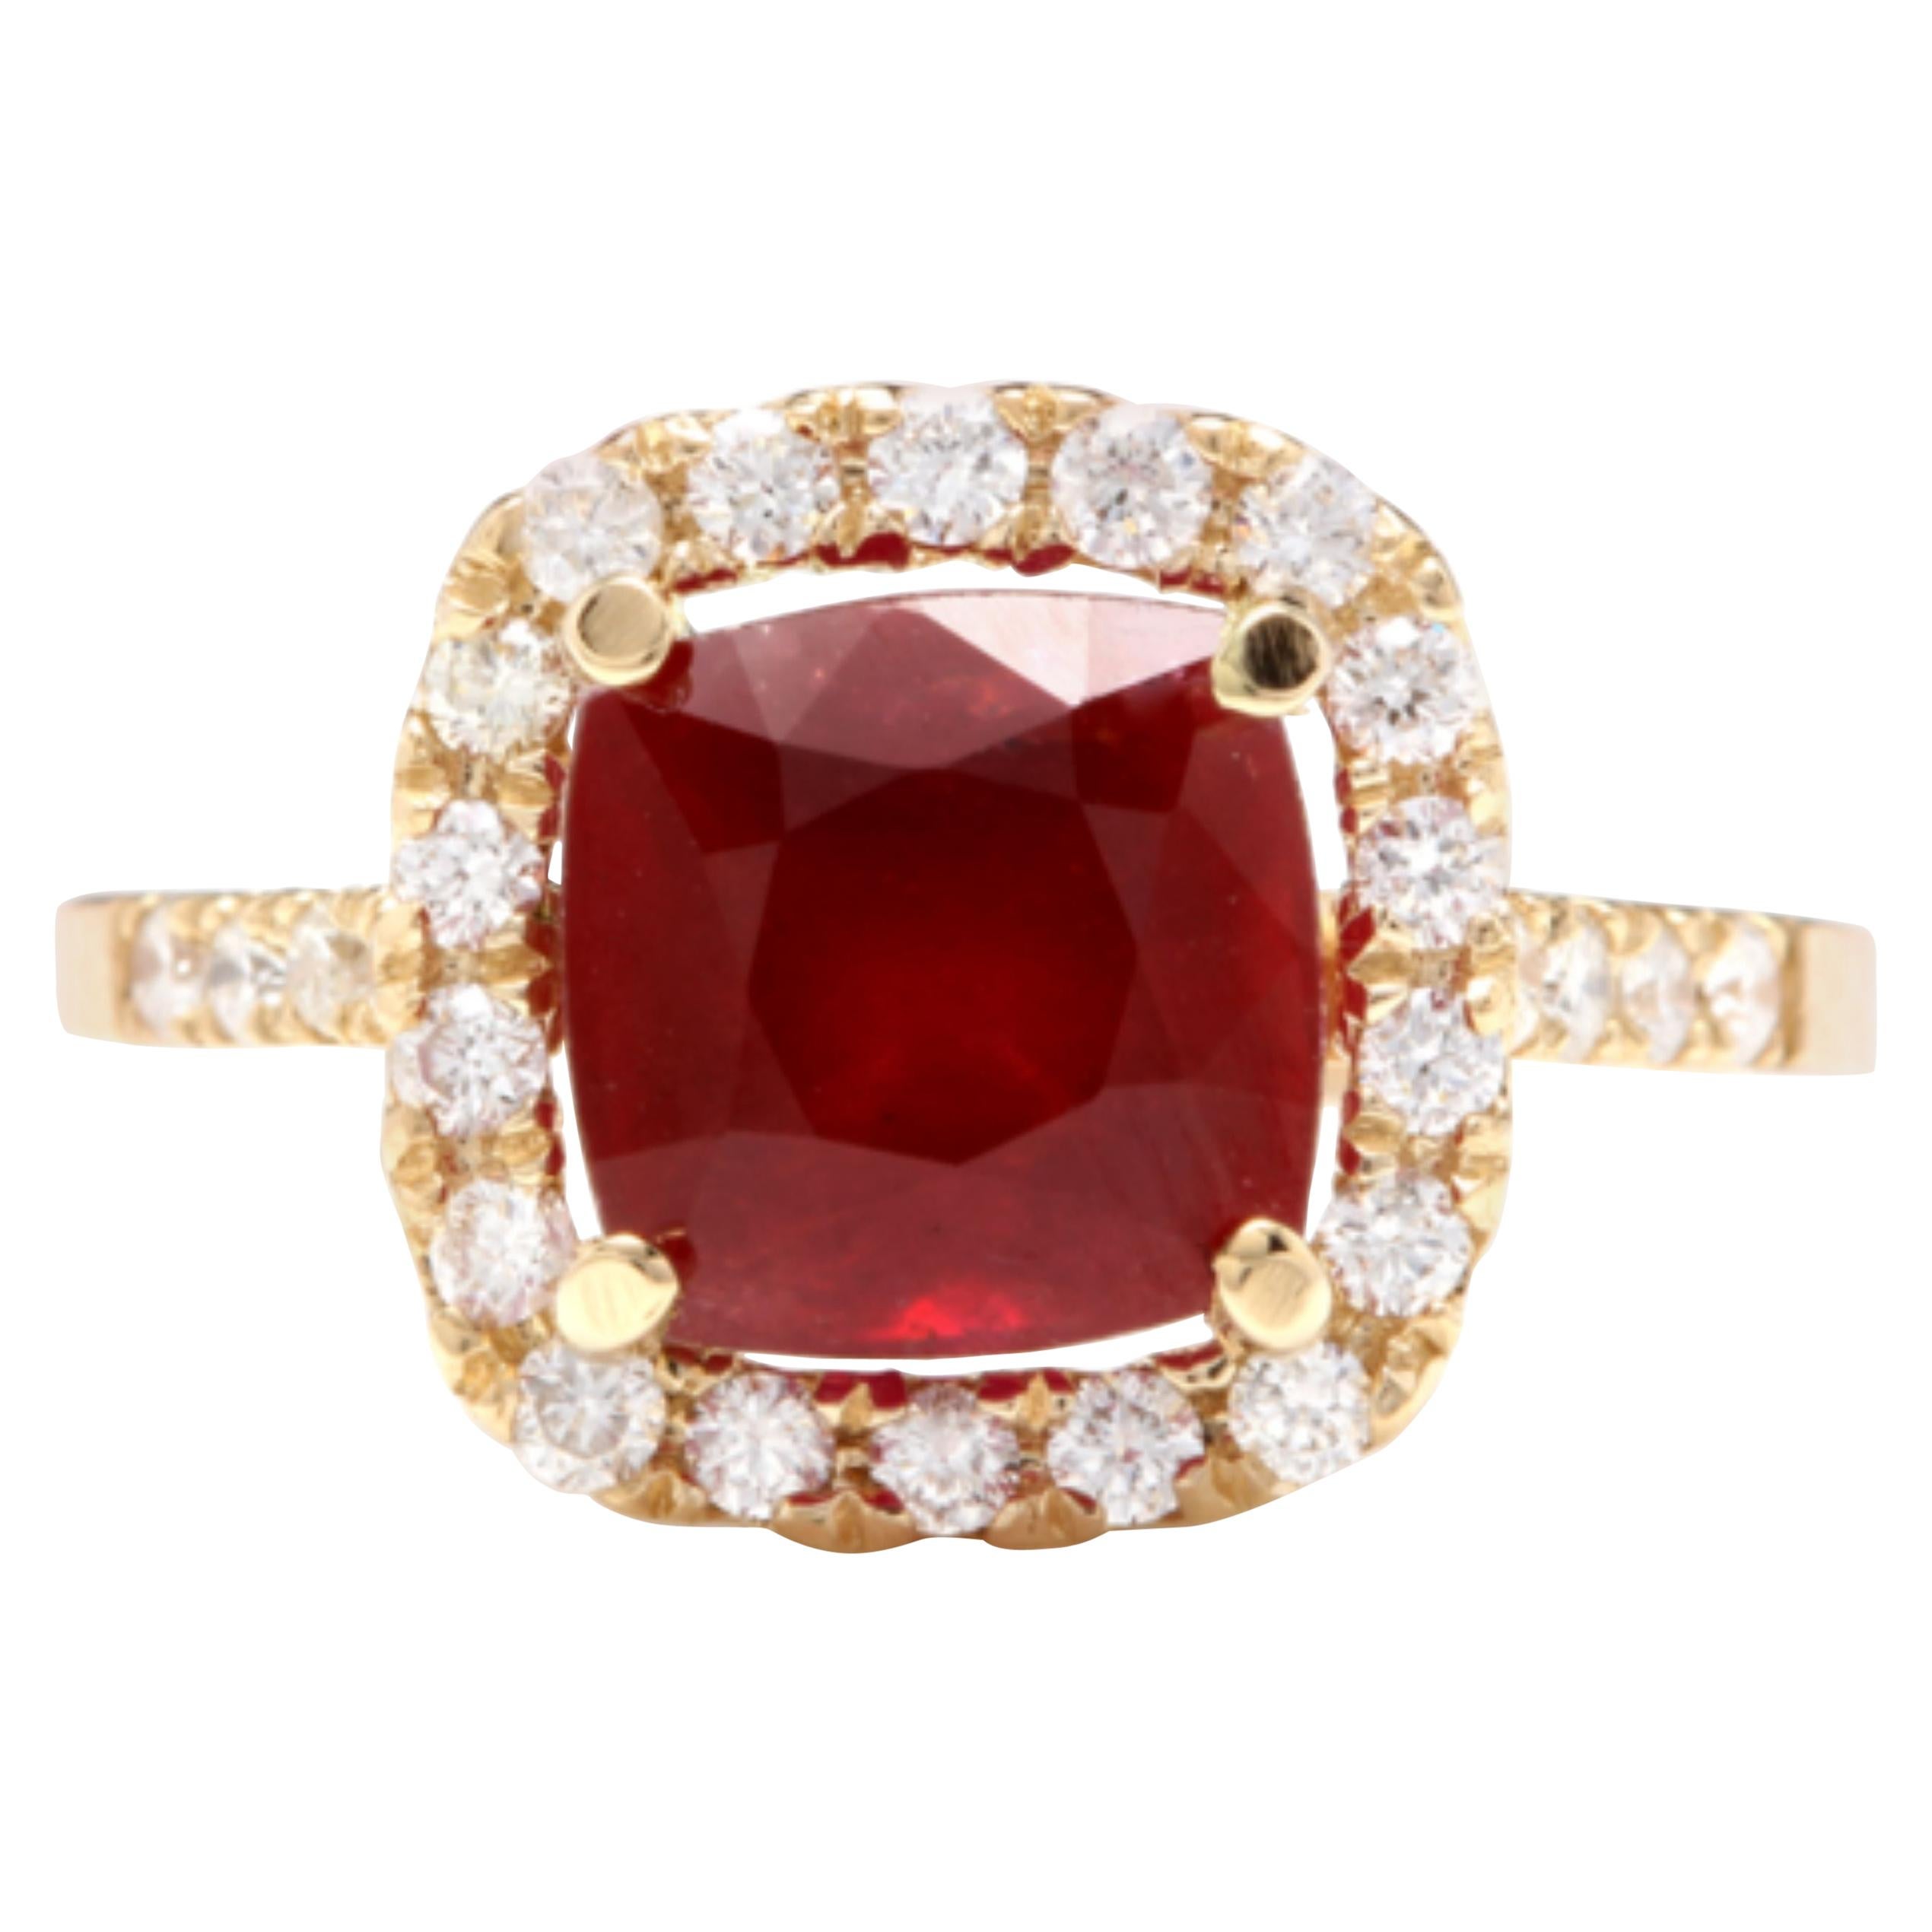 4.60 Carat Impressive Red Ruby and Natural Diamond 14 Karat Yellow Gold Ring For Sale